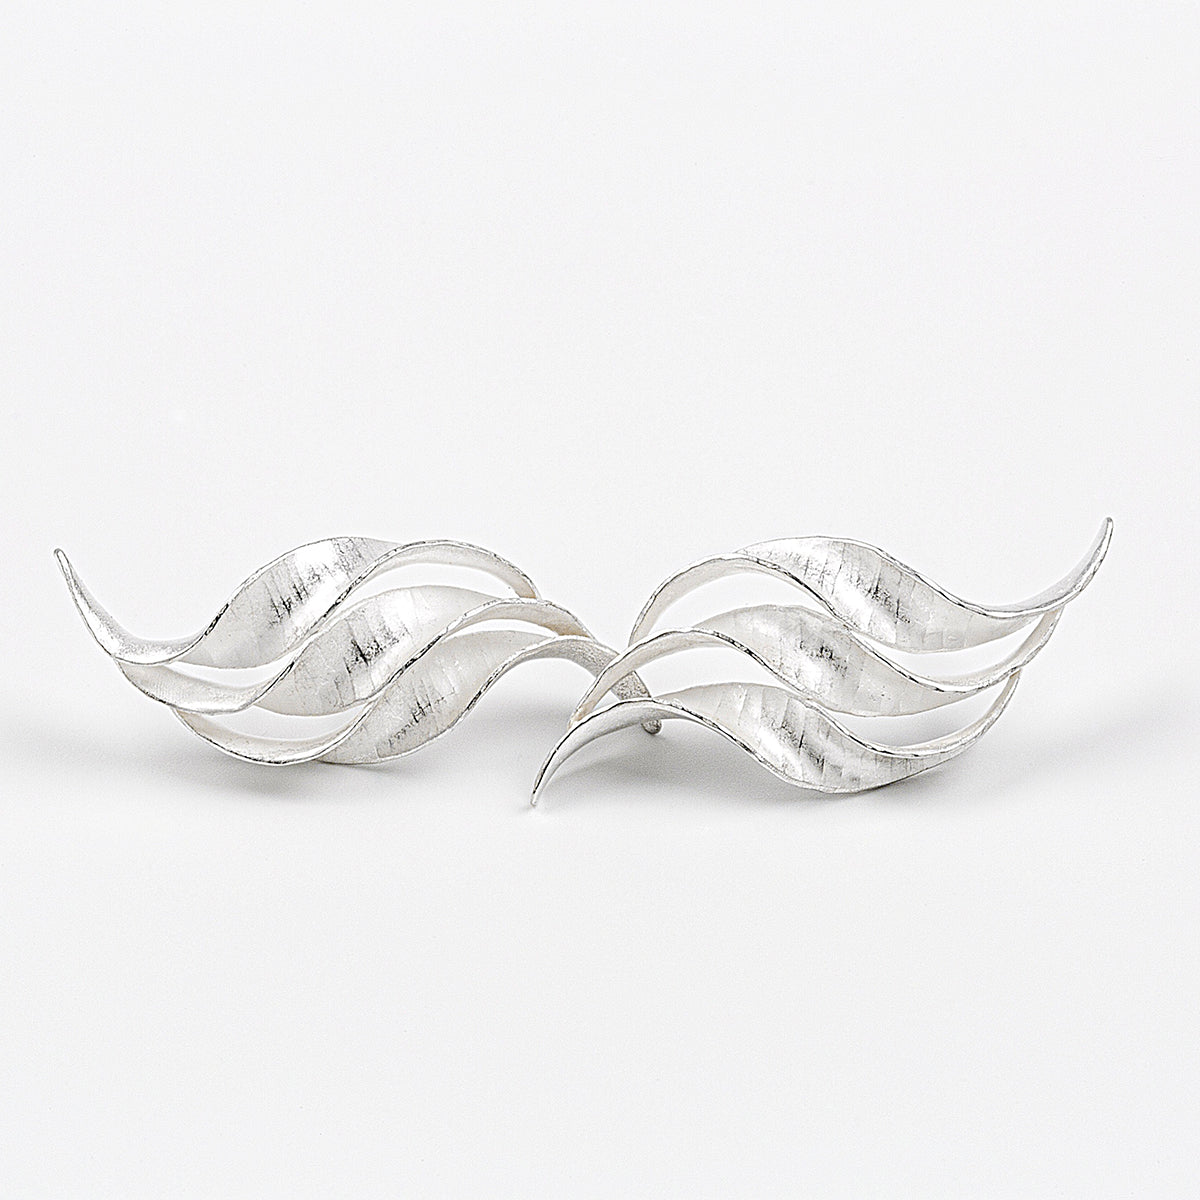 A pair of silver wedding earrings in the form of a triple wave of parallel curling, twisting S-shapes. They have a hammered texture, non-reflective surface and burnished edges. 